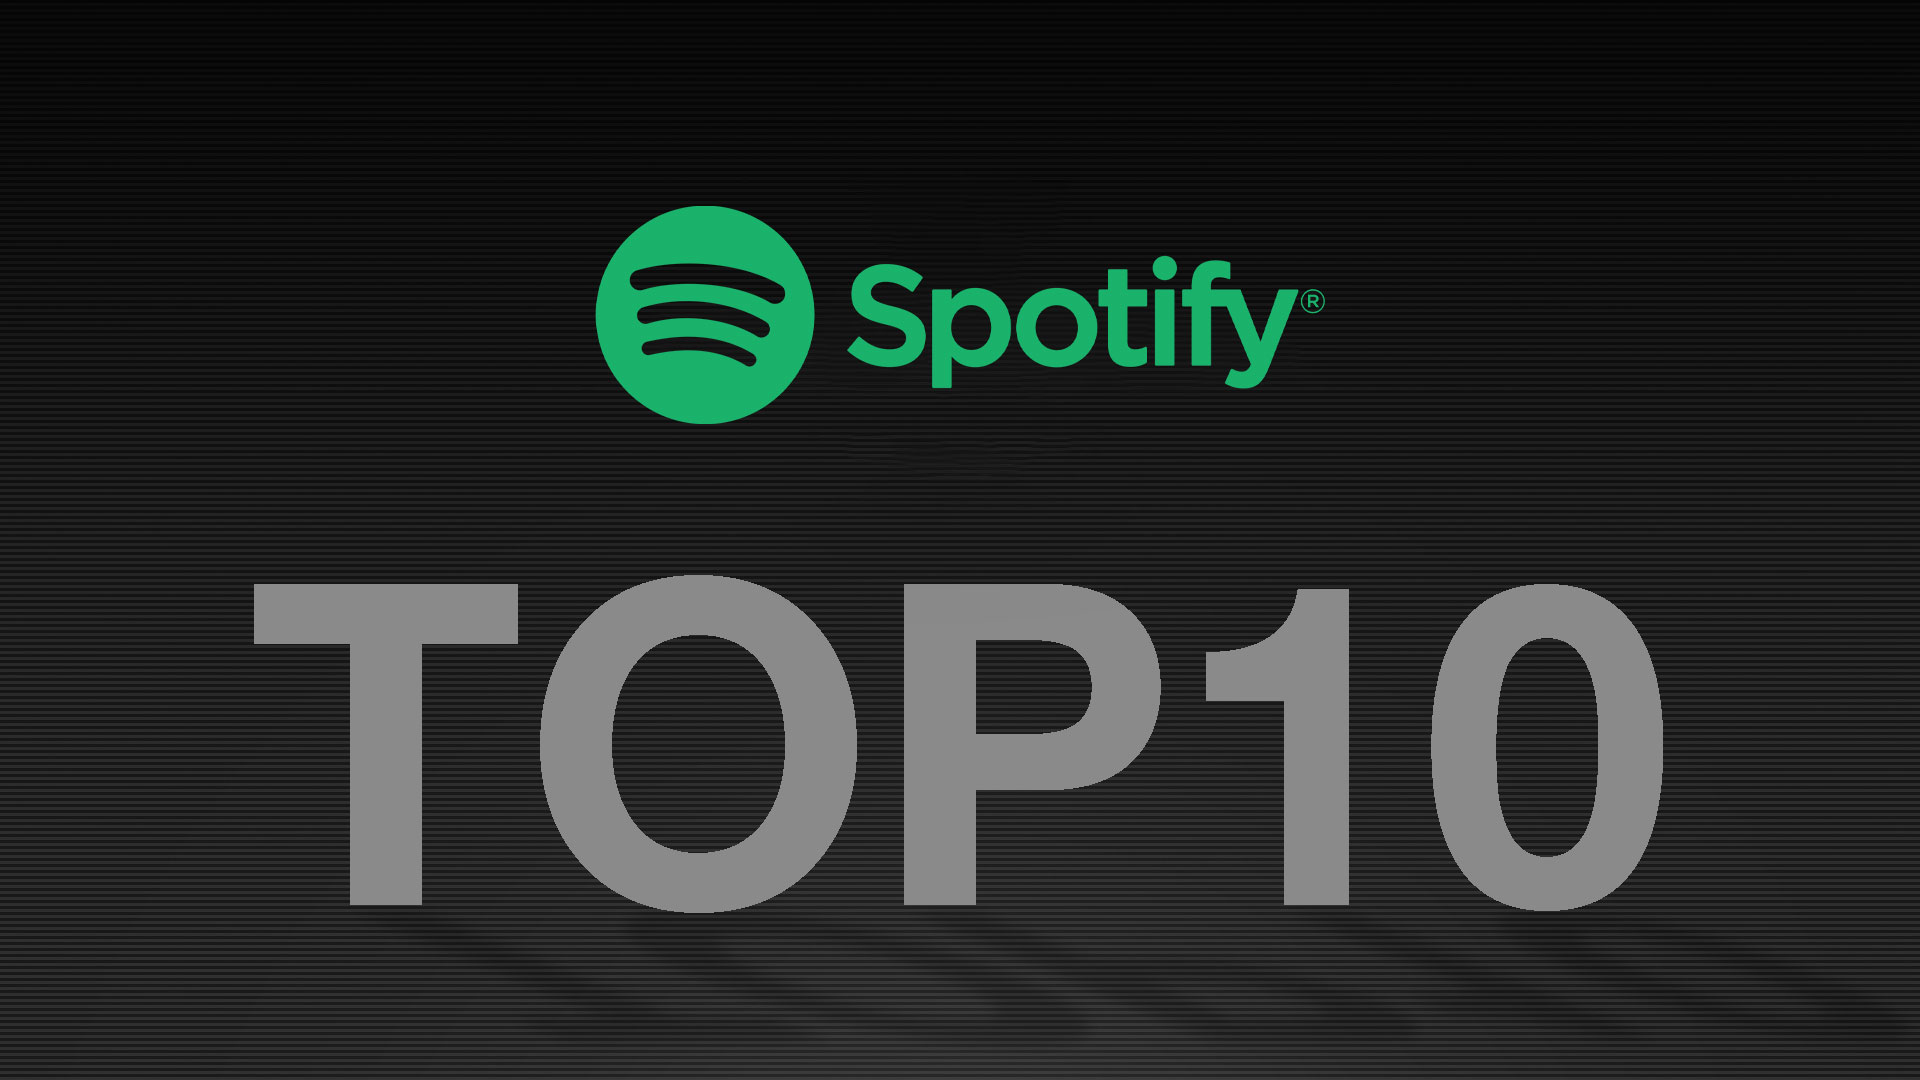 mental Adskillelse Tilskyndelse Spotify Ranking in Mexico: Top 10 of today's most listened podcasts  Wednesday, January 05 - Infobae